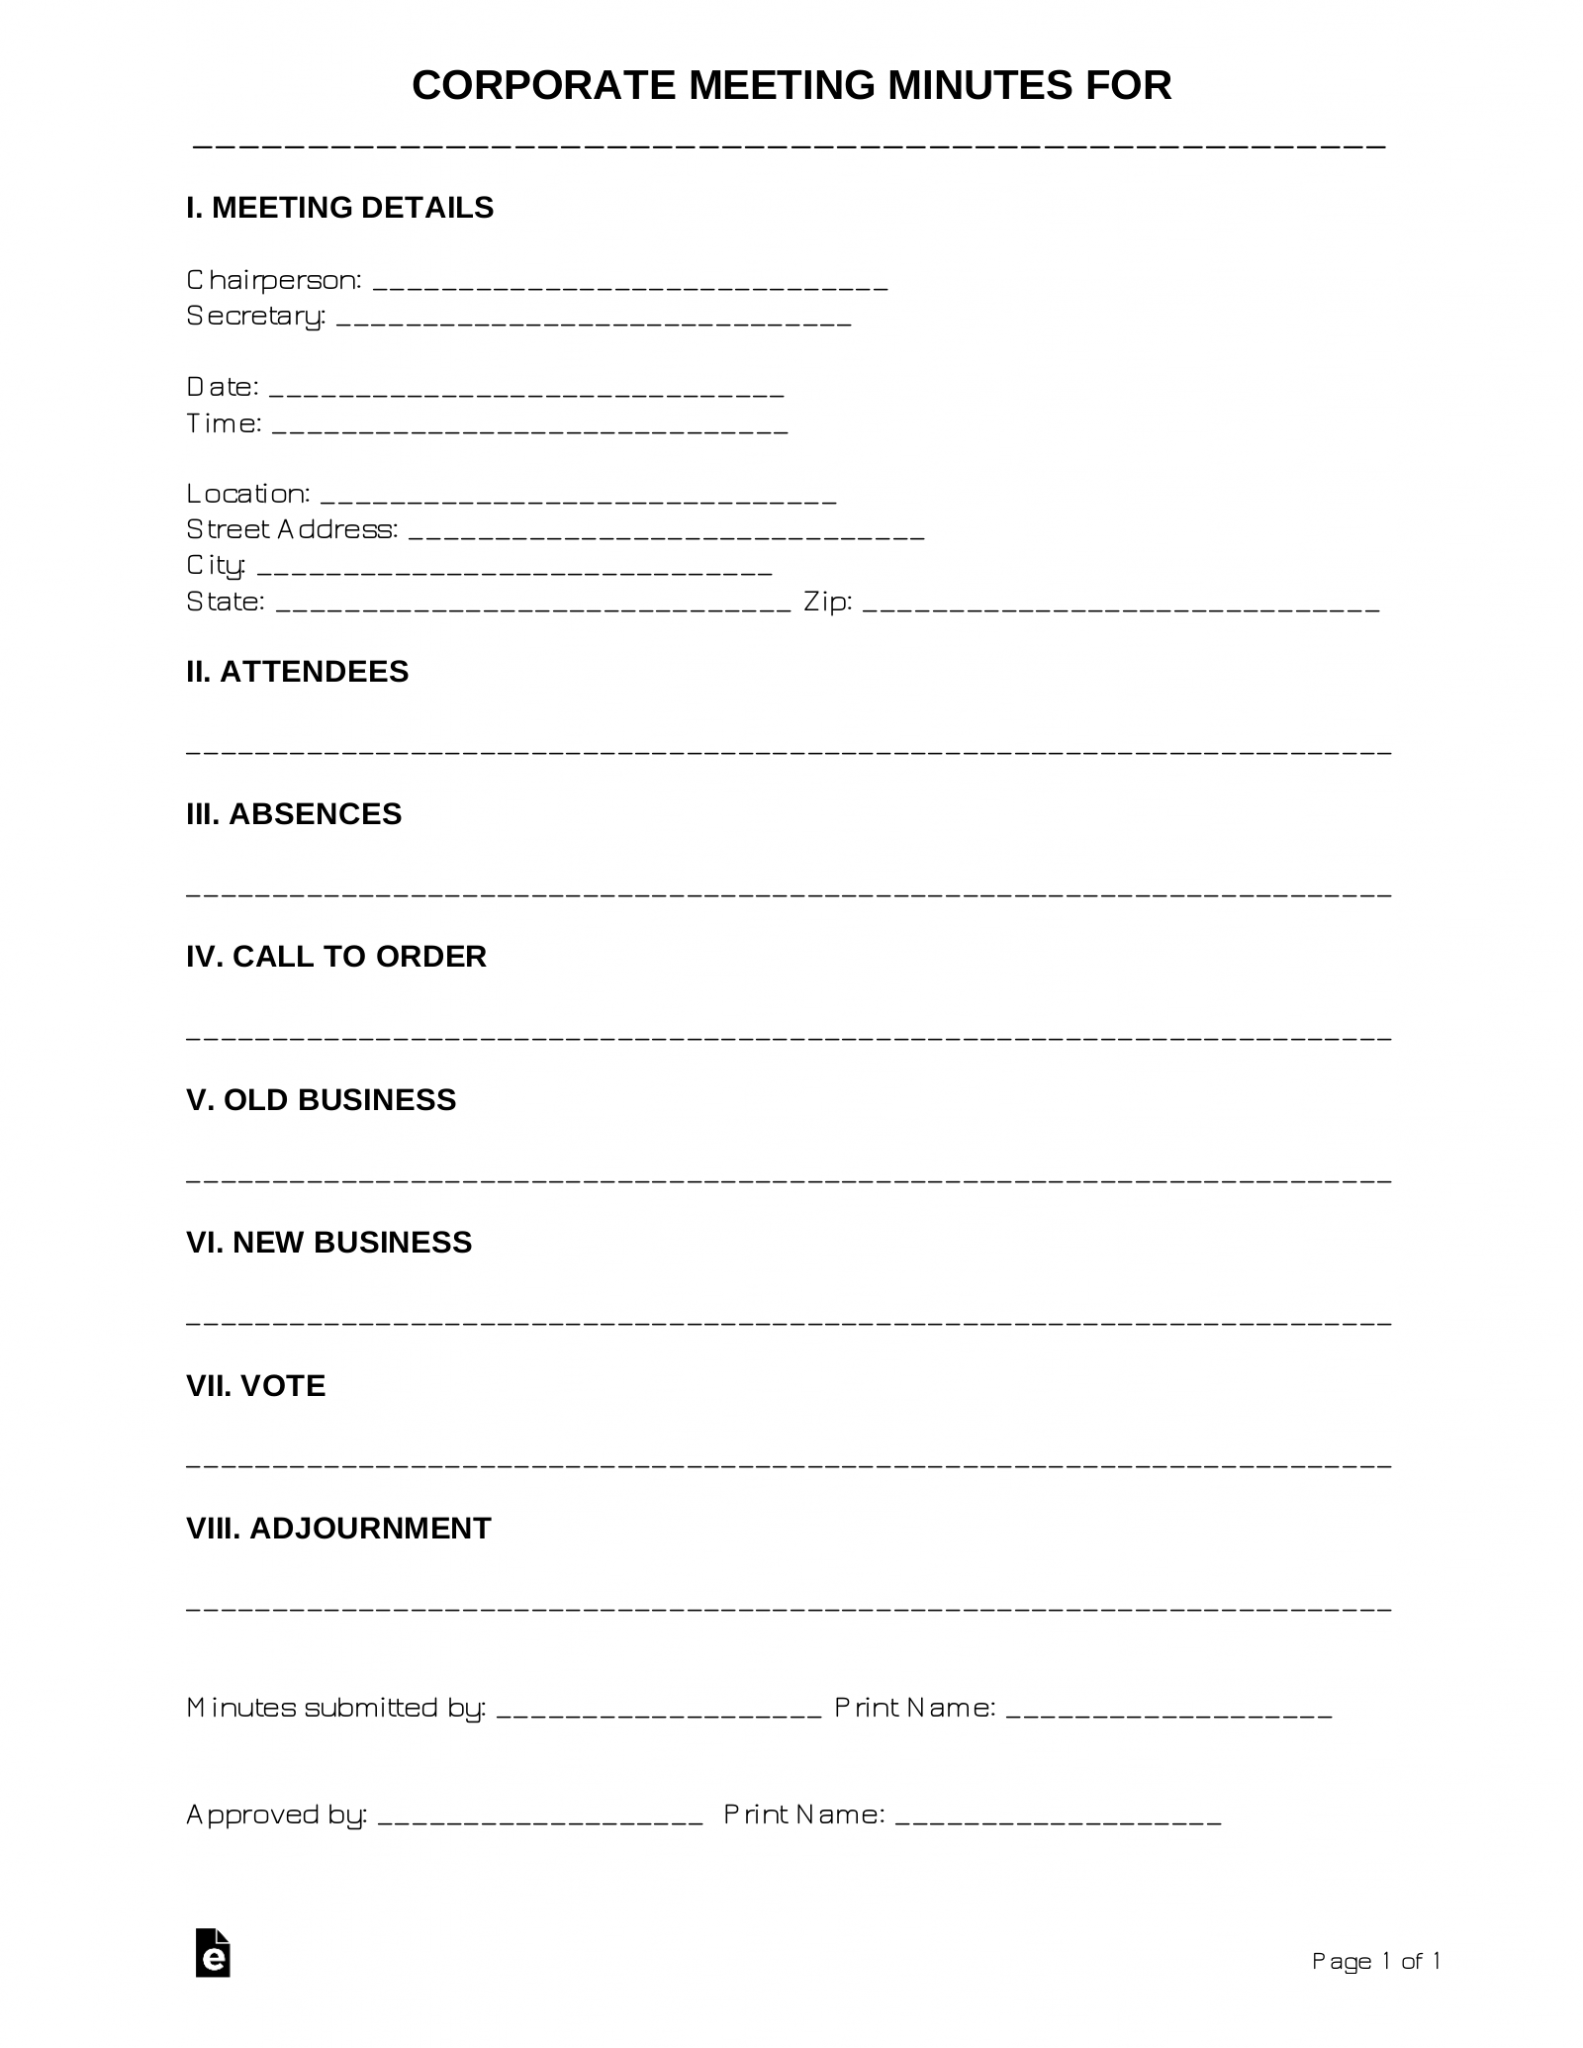 free-corporate-meeting-minutes-template-sample-pdf-word-eforms